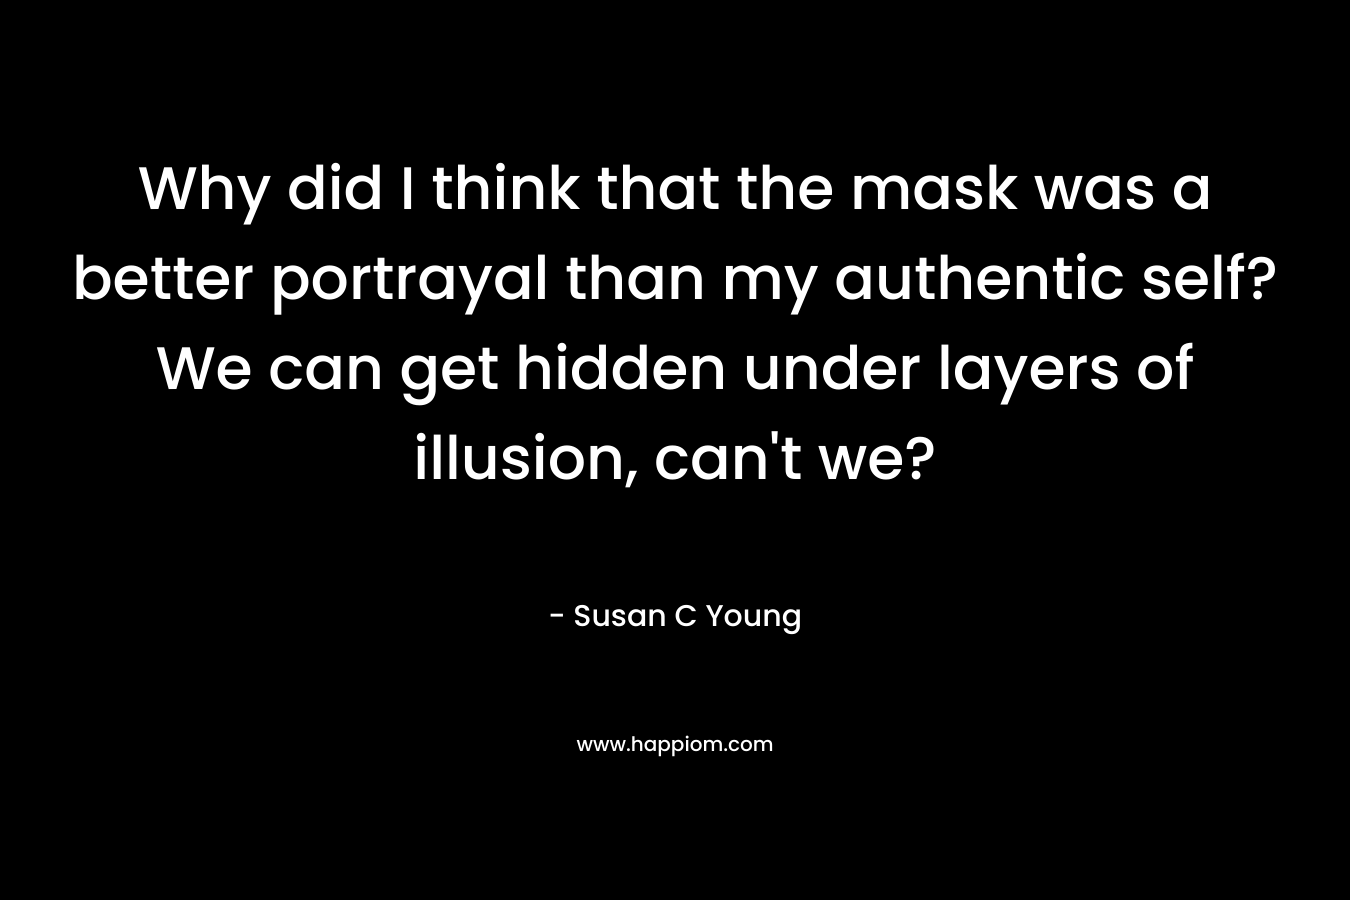 Why did I think that the mask was a better portrayal than my authentic self? We can get hidden under layers of illusion, can't we?